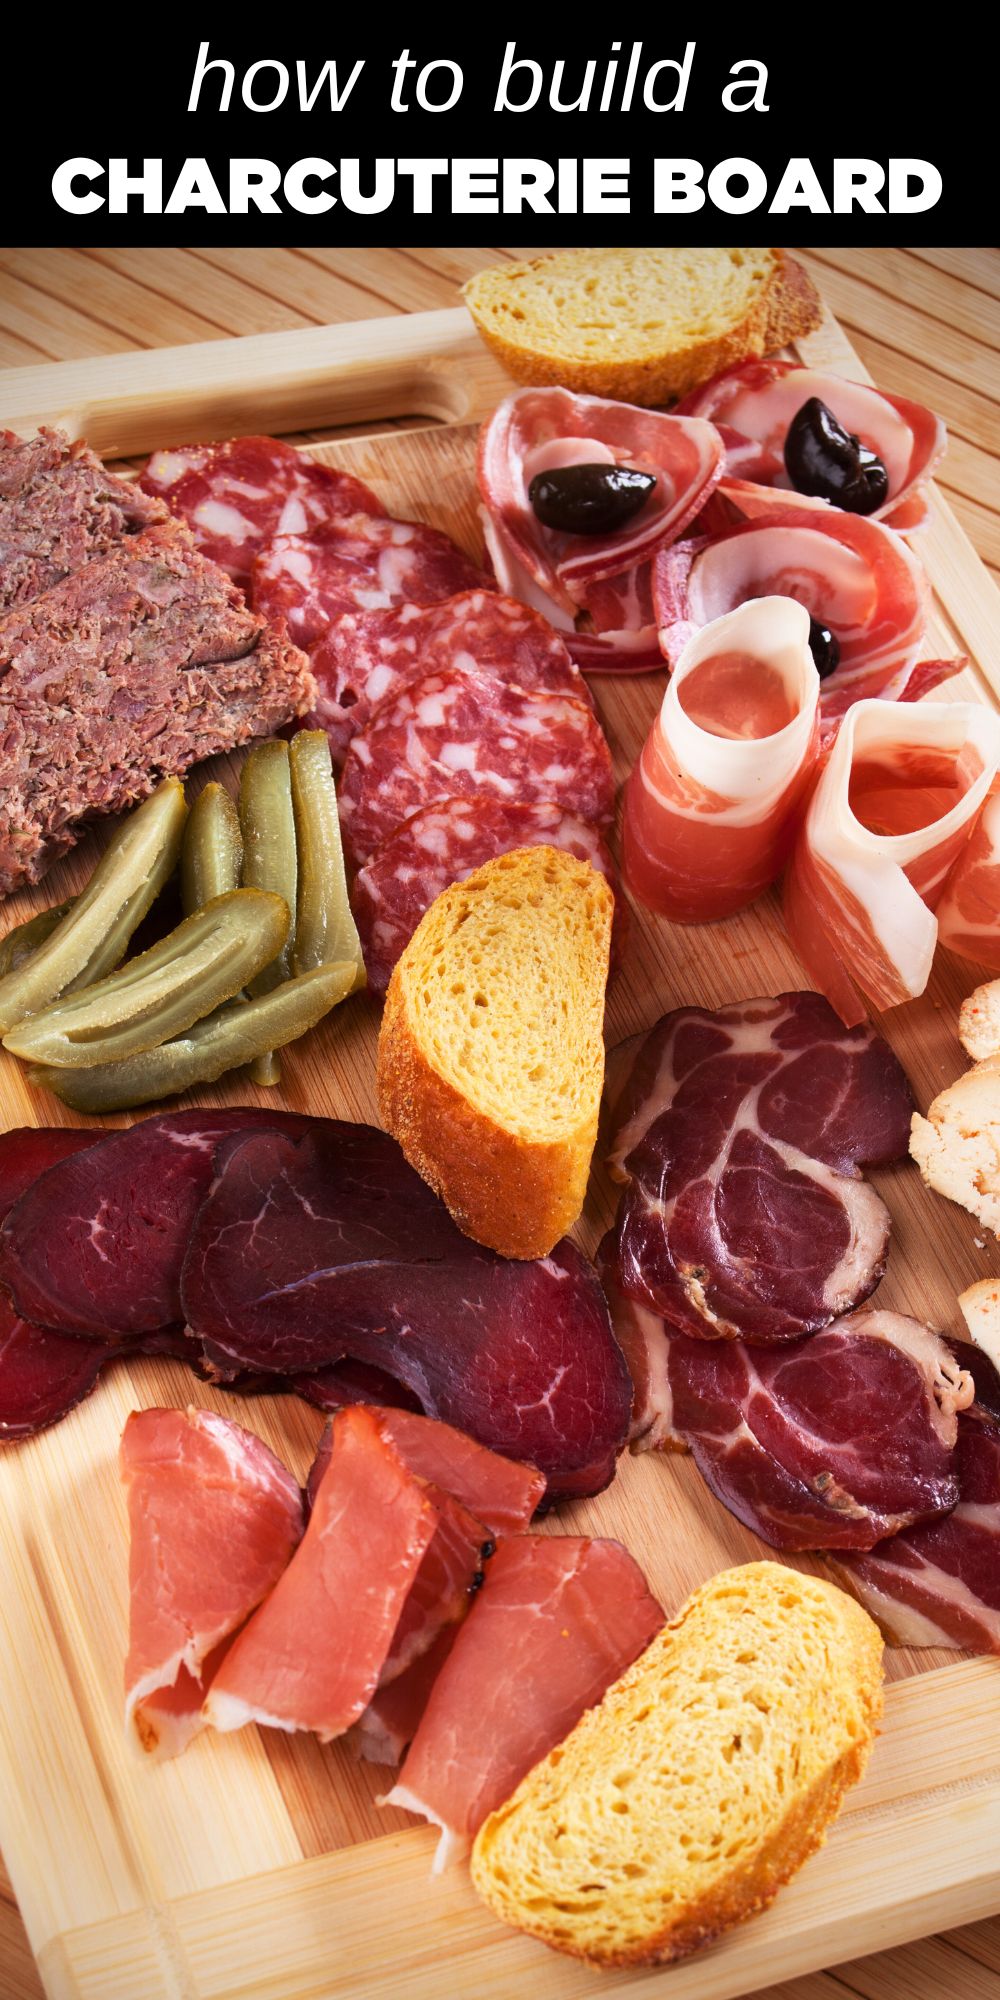 With the holidays just around the corner, there will be plenty of parties to attend, and there’s no better appetizer for special occasions than a charcuterie board.